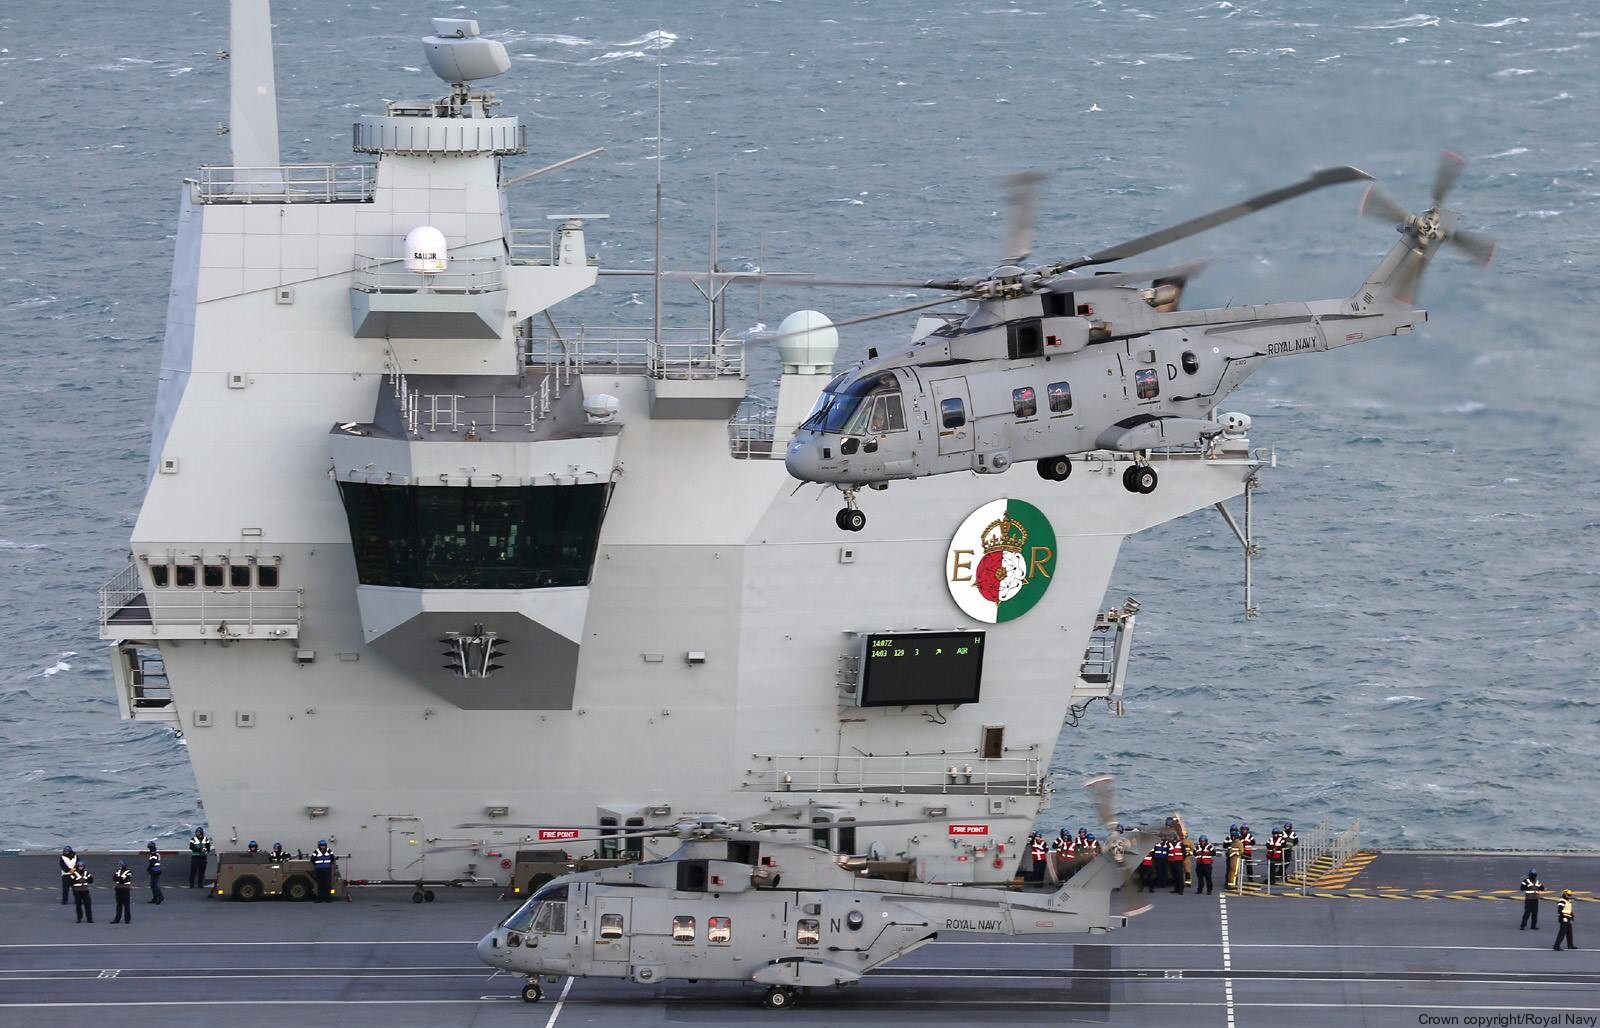 hms queen elizabeth r-08 aircraft carrier royal navy 99 merlin hm.2 hc.4 helicopter